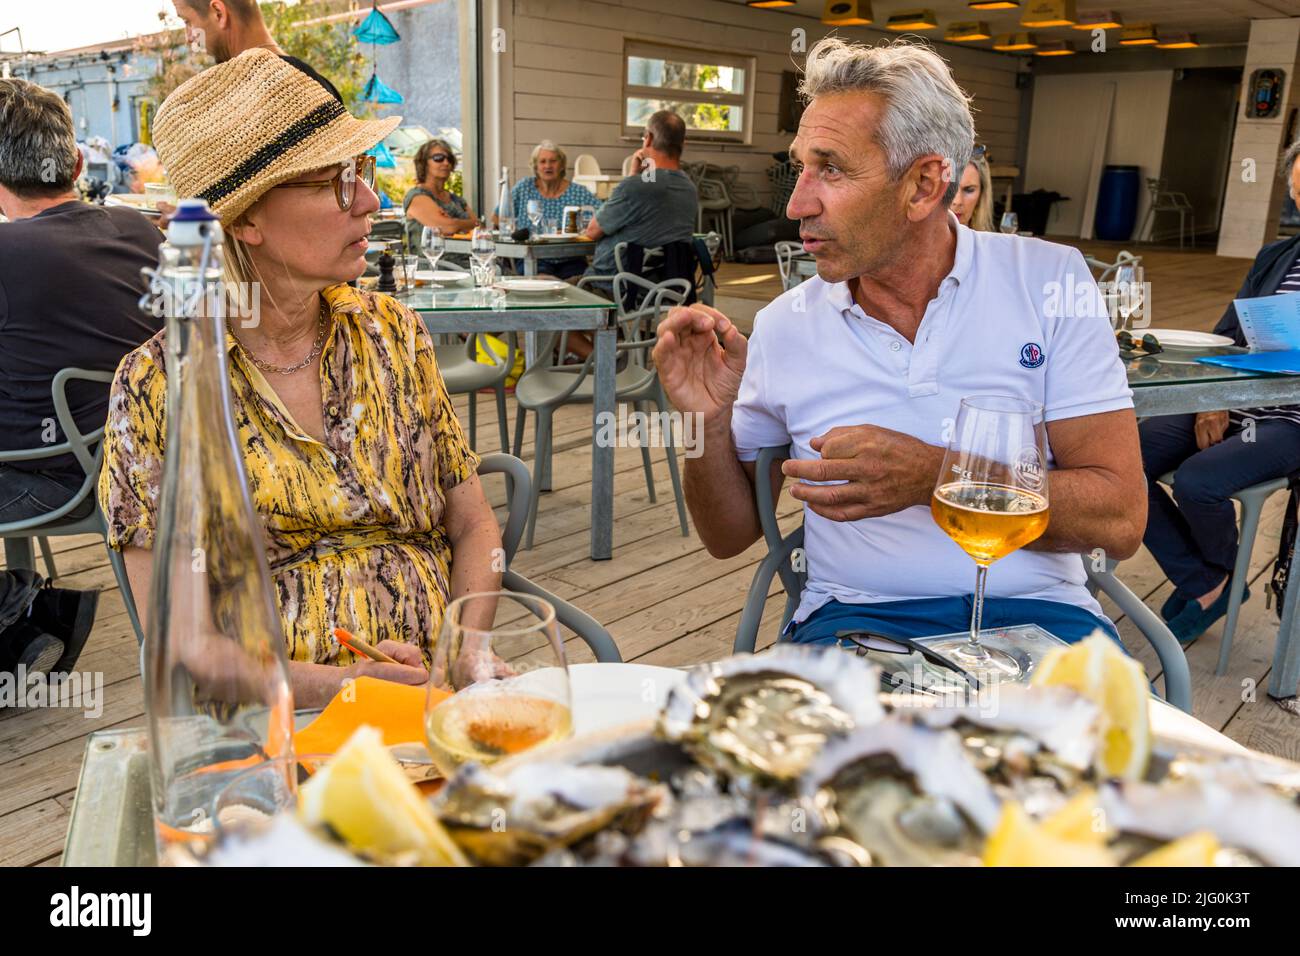 Florent Tarbouriech (r.) in conversation with food journalist Angela Berg at Le St Pierre Tarbouriech beach pavilion Stock Photo